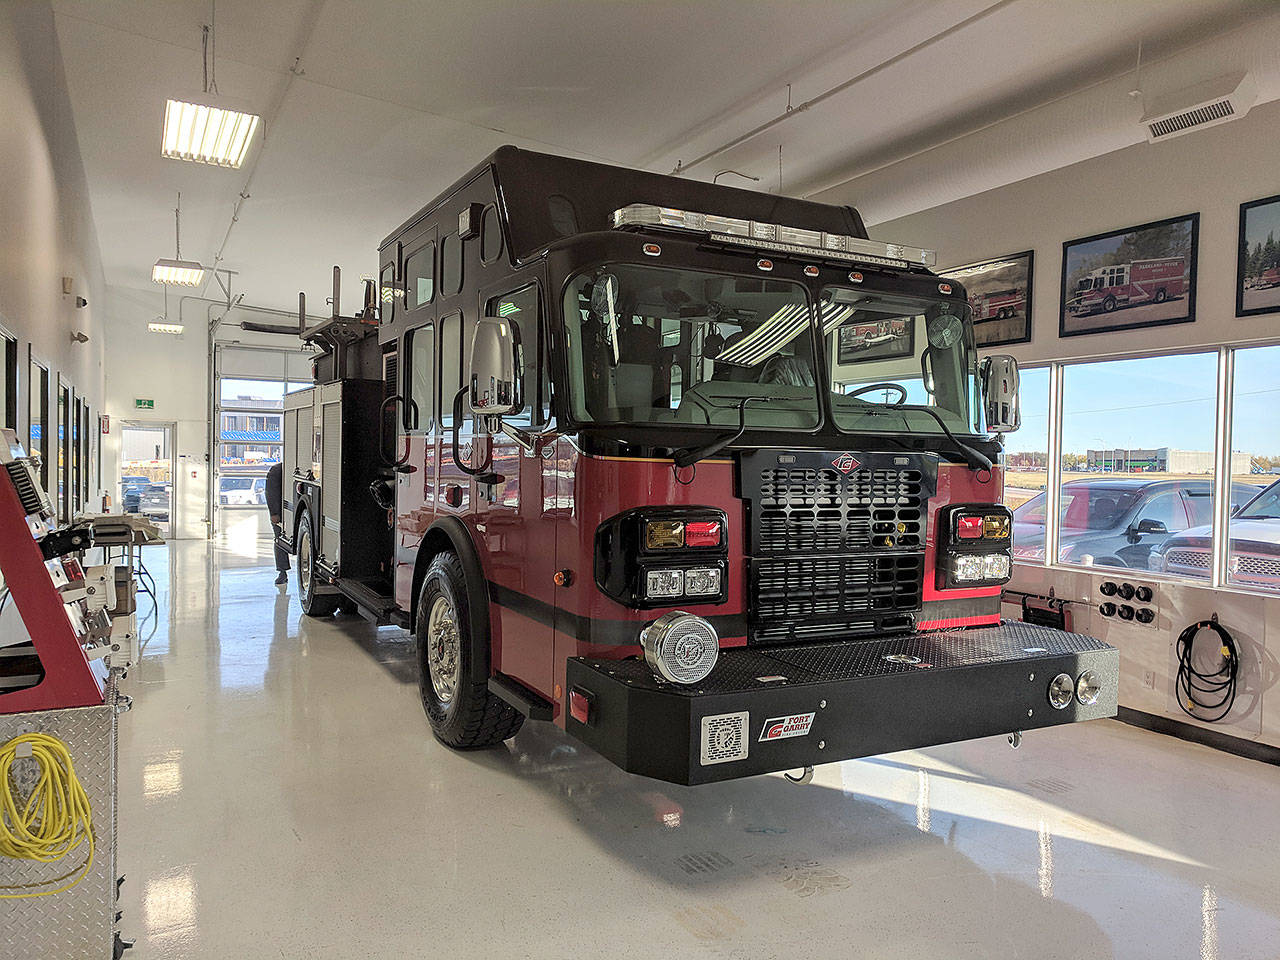 The Ocean Shores Fire Department’s new engine, currently en route from its place of manufacture in Canada. (Courtesy Ocean Shores Fire Department)